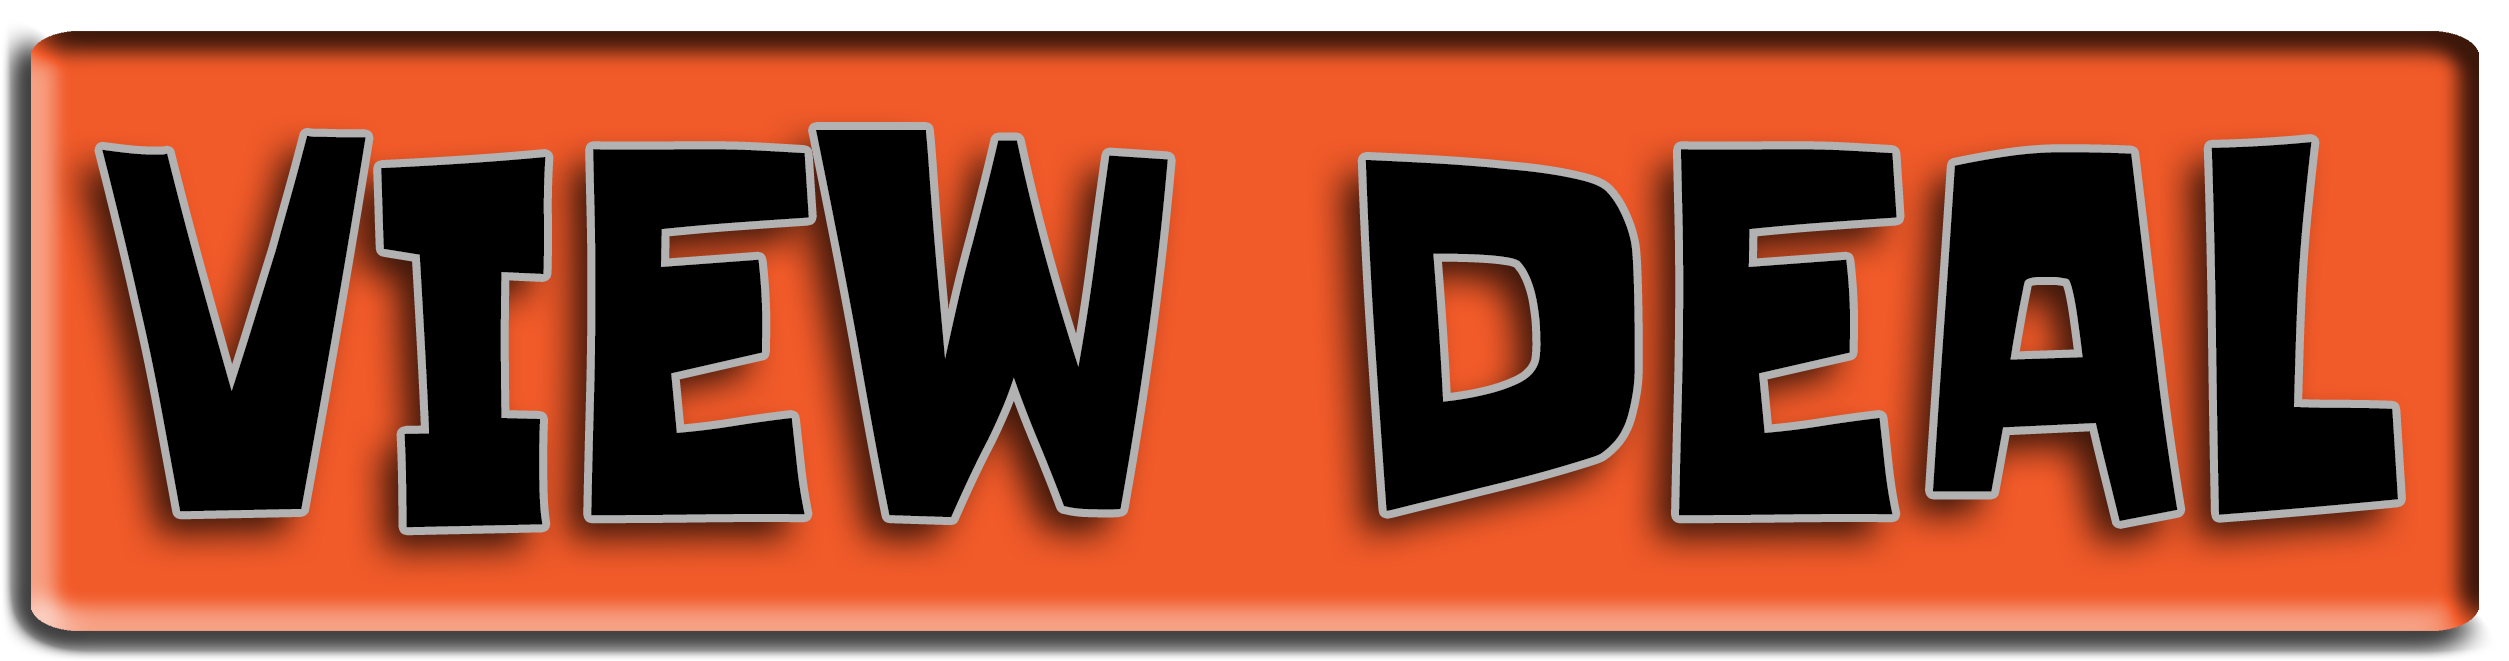 View Deal Button Orange PNG image